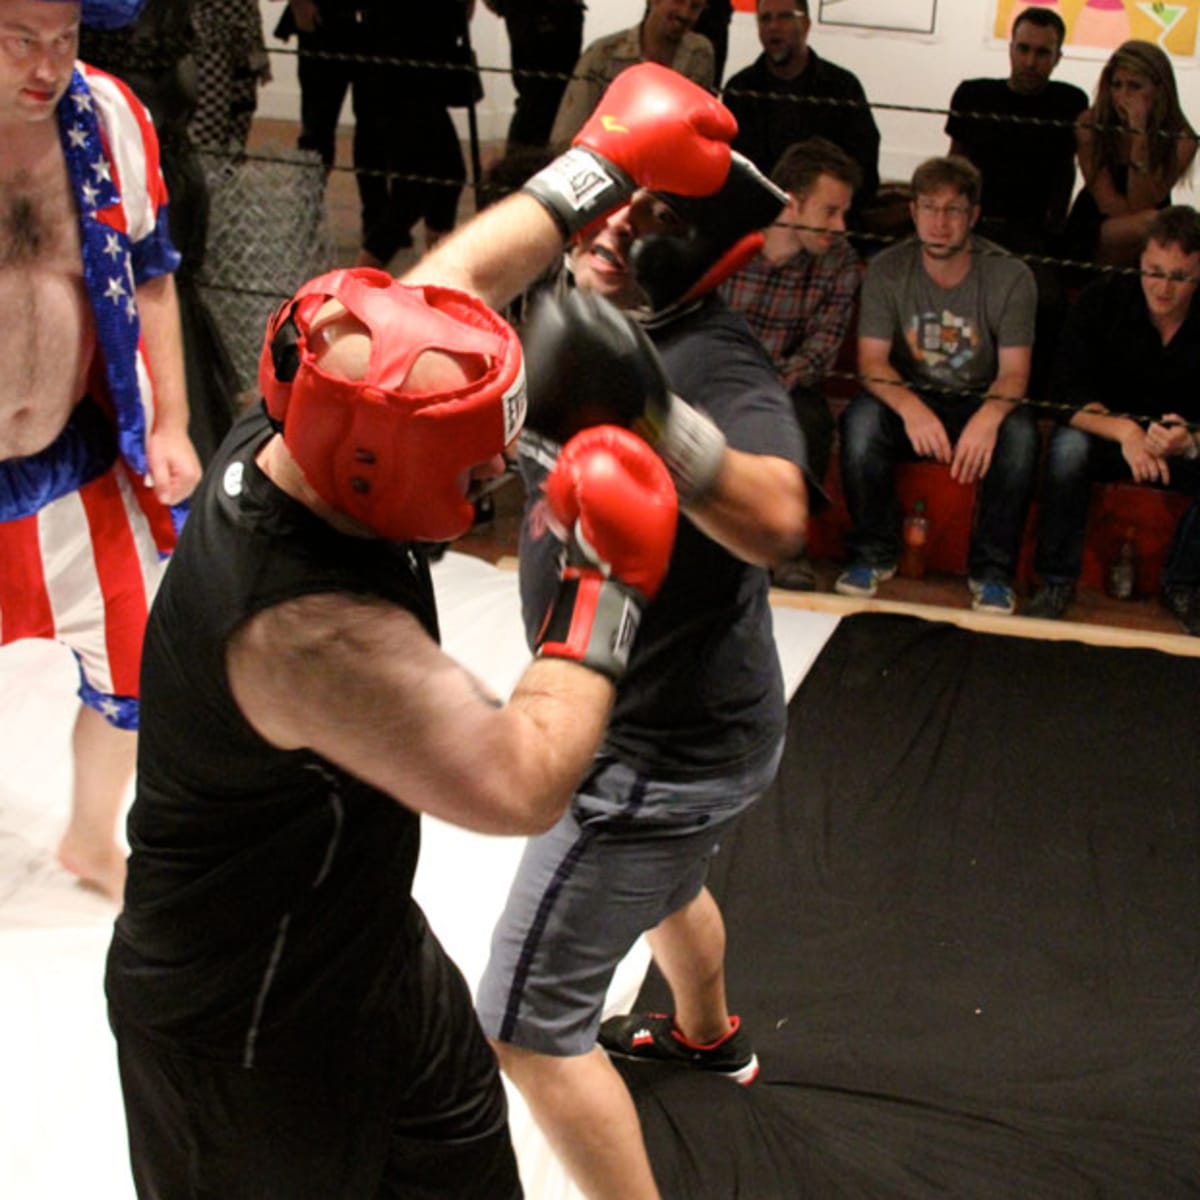 Chess Boxing Will Test Your Body and Your Brain